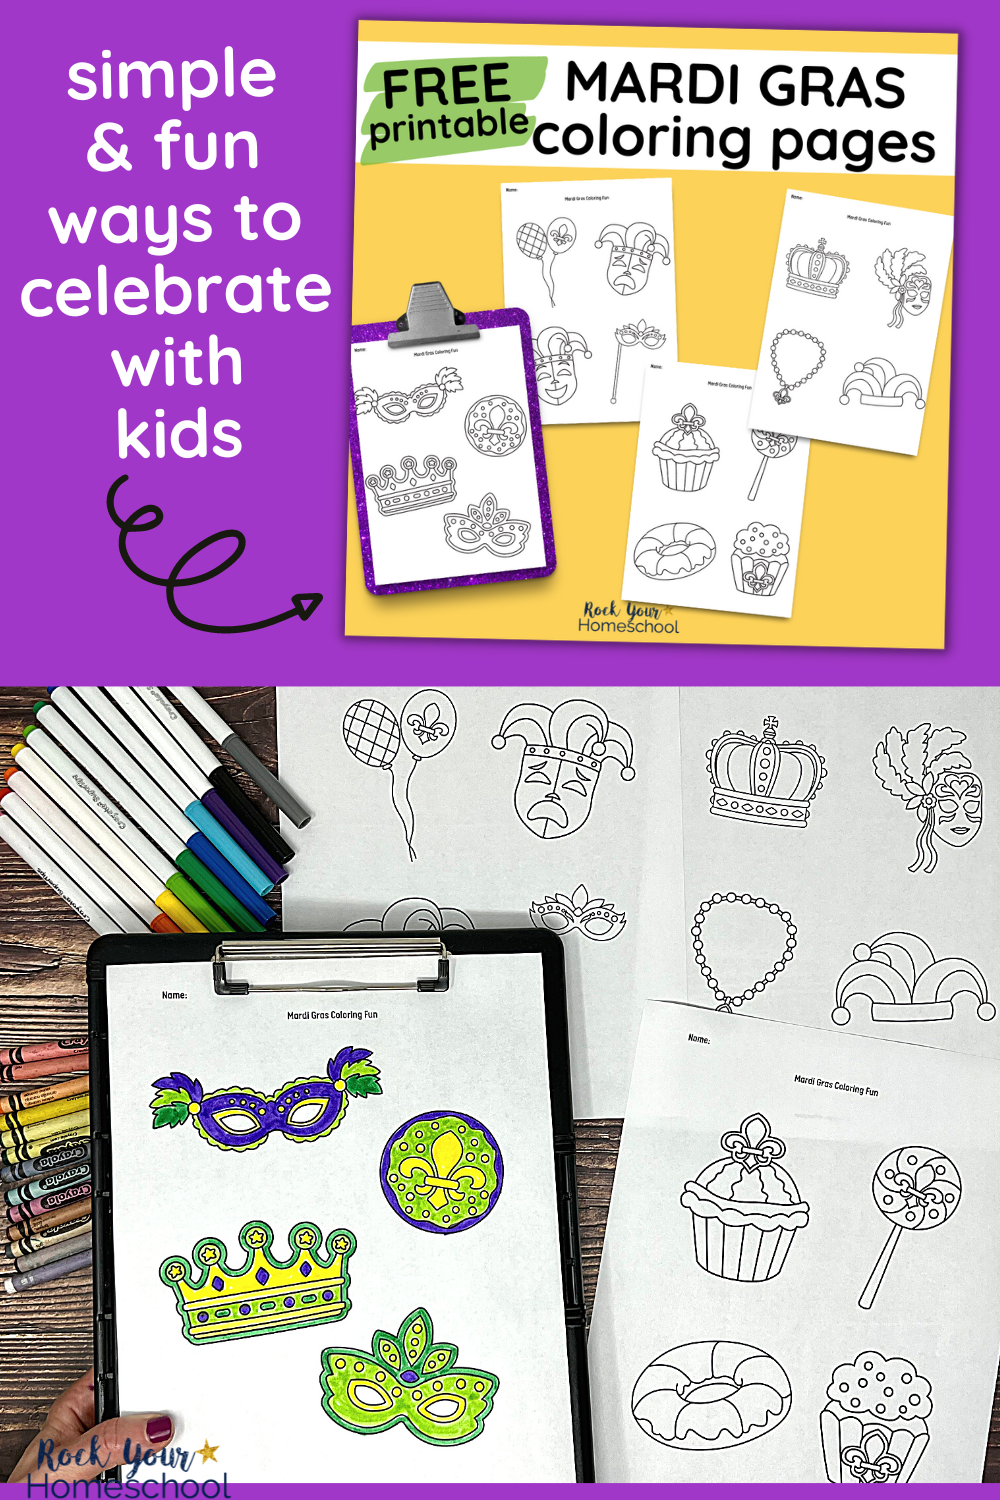 Mardi Gras Coloring Pages: Simple and Fun Ways to Celebrate with Kids (4 Free)